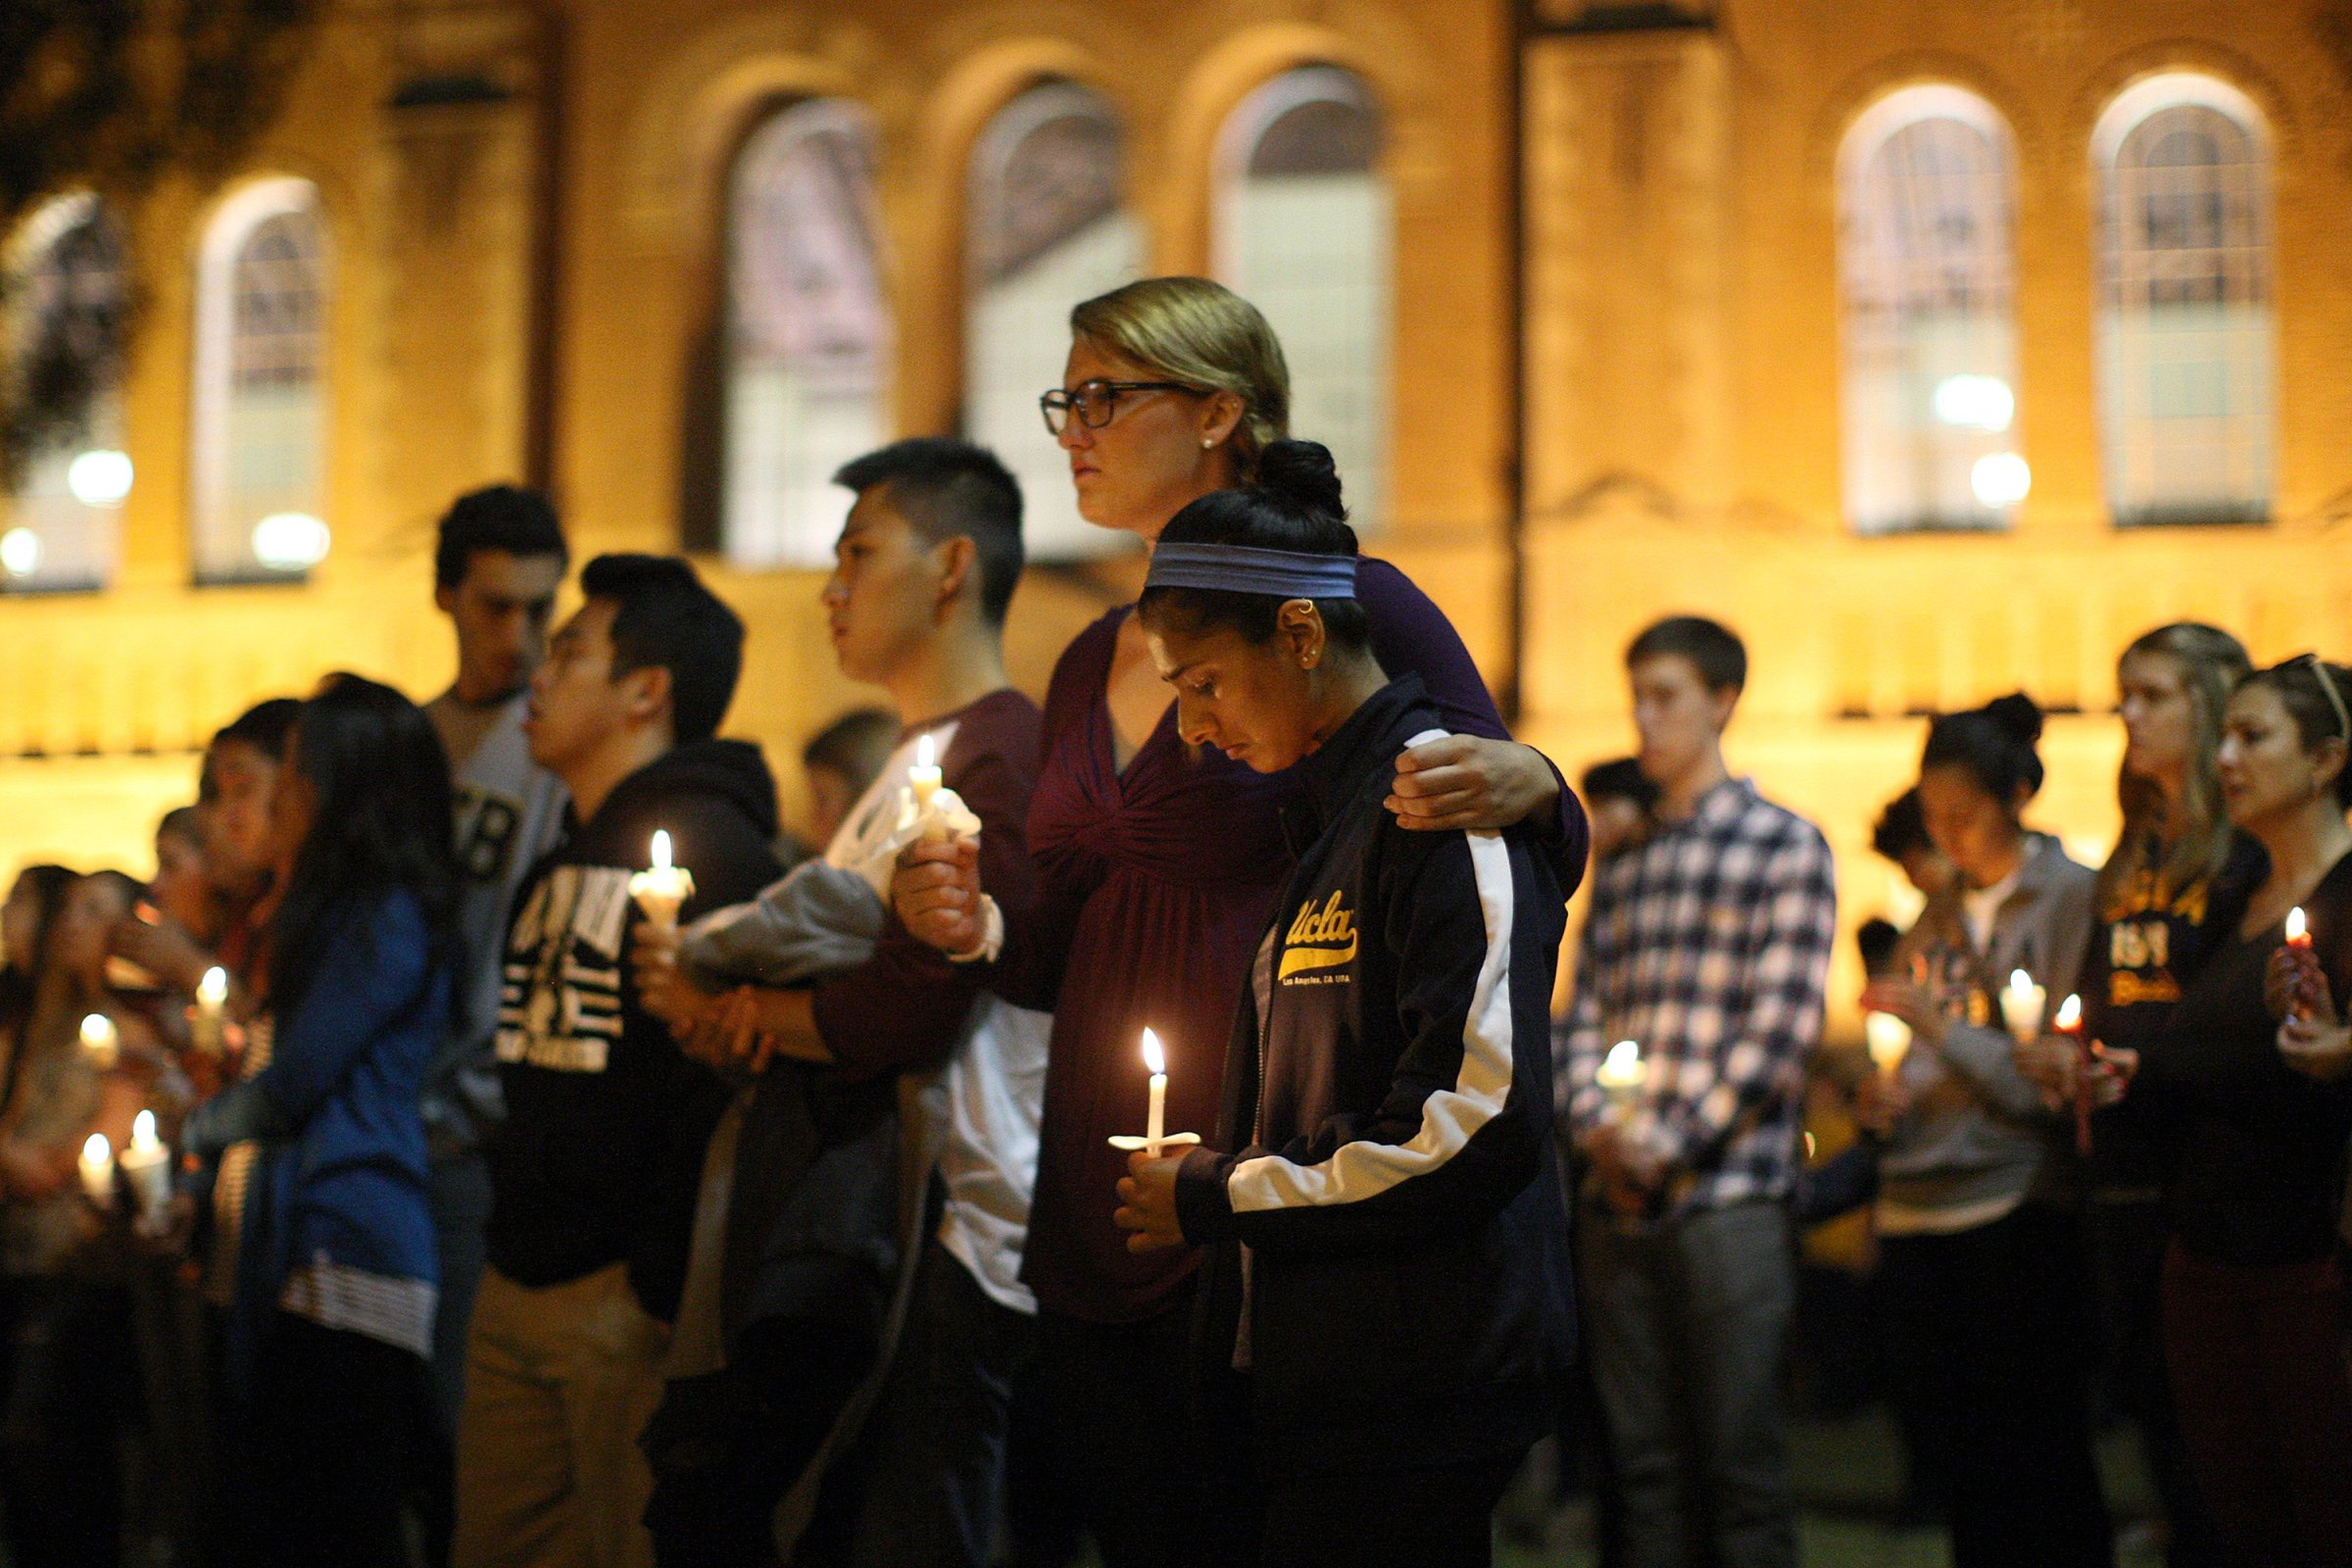 Students of UCSB and UCLA mourn at a candlelight vigil at UCLA for the victims of a killing rampage over the weekend on May 26, 2014 in Los Angeles.